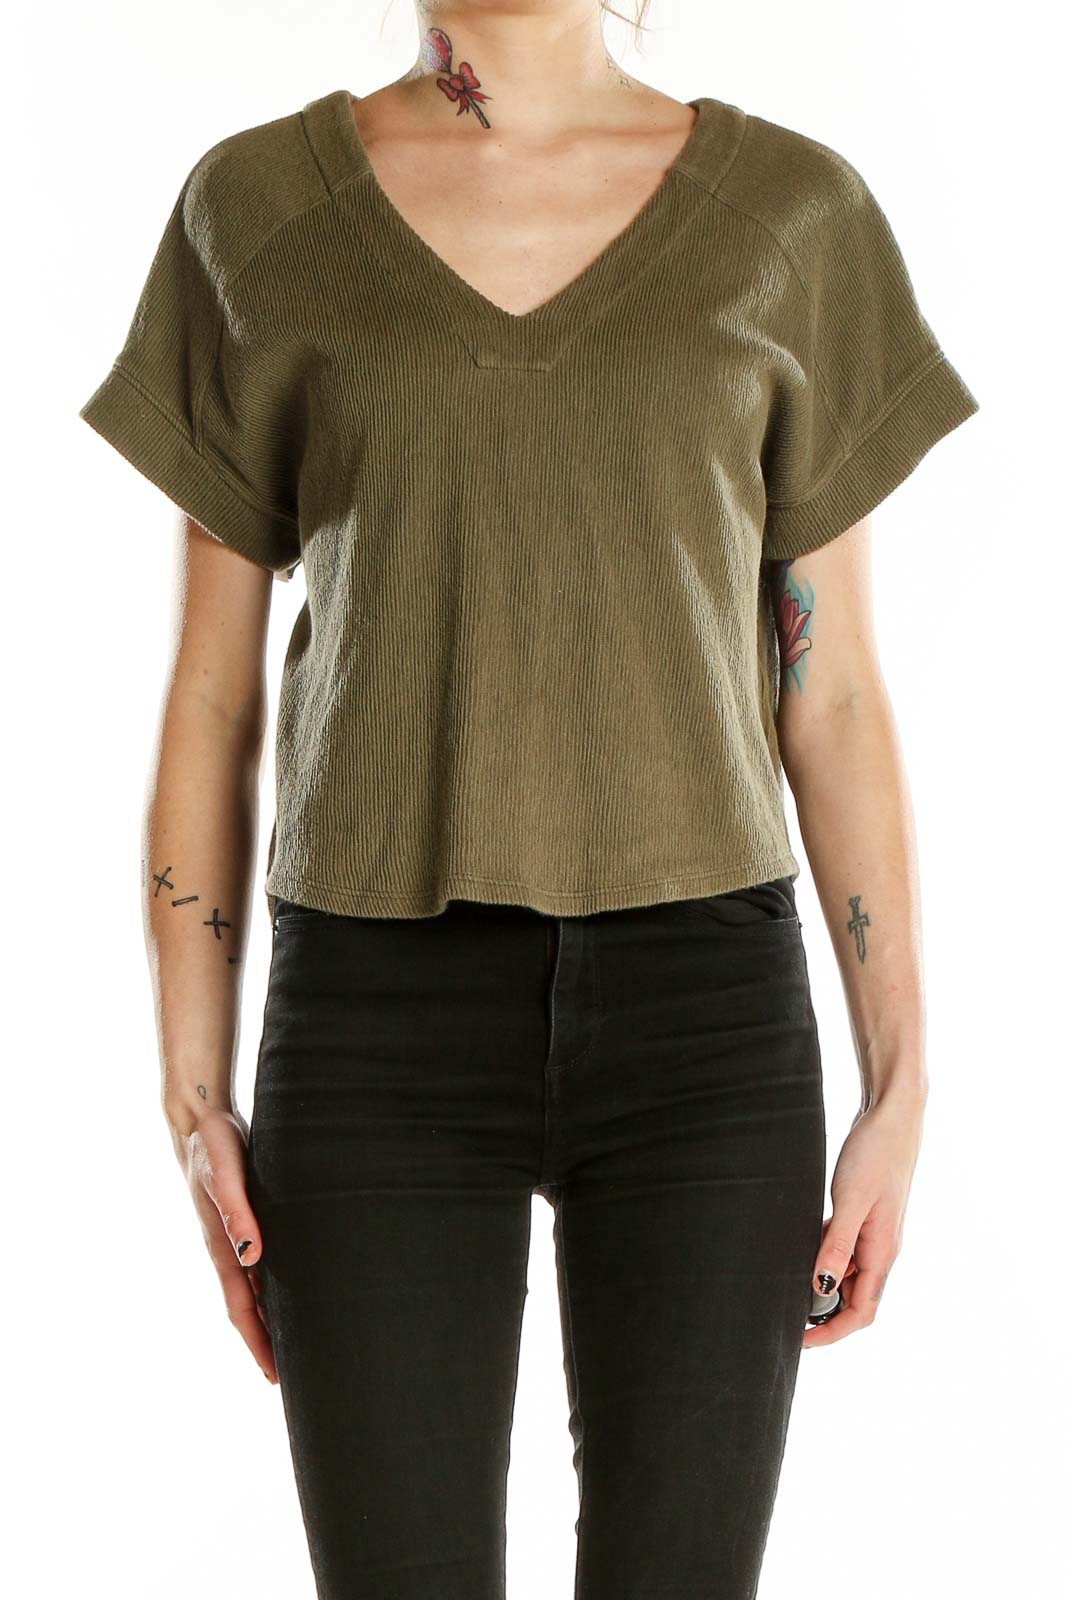 Green V Neck Shorts Sleeve Top Front